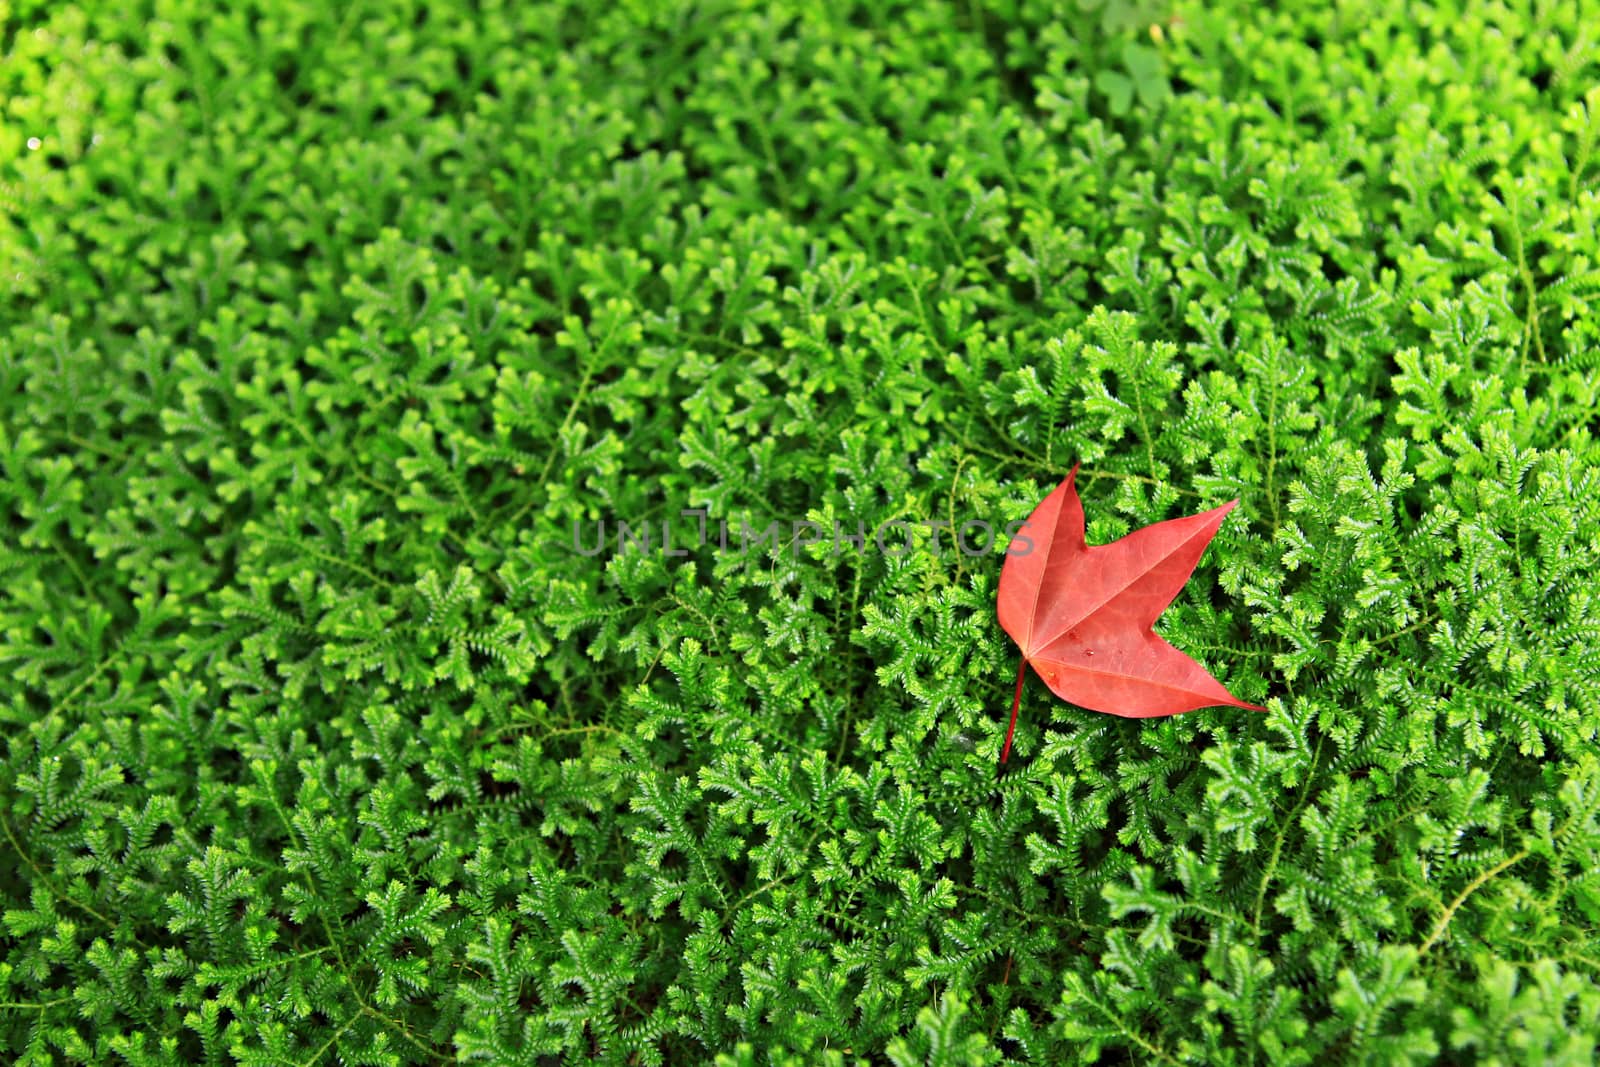 Red maple leaf fallen on the green grass by Mercedess